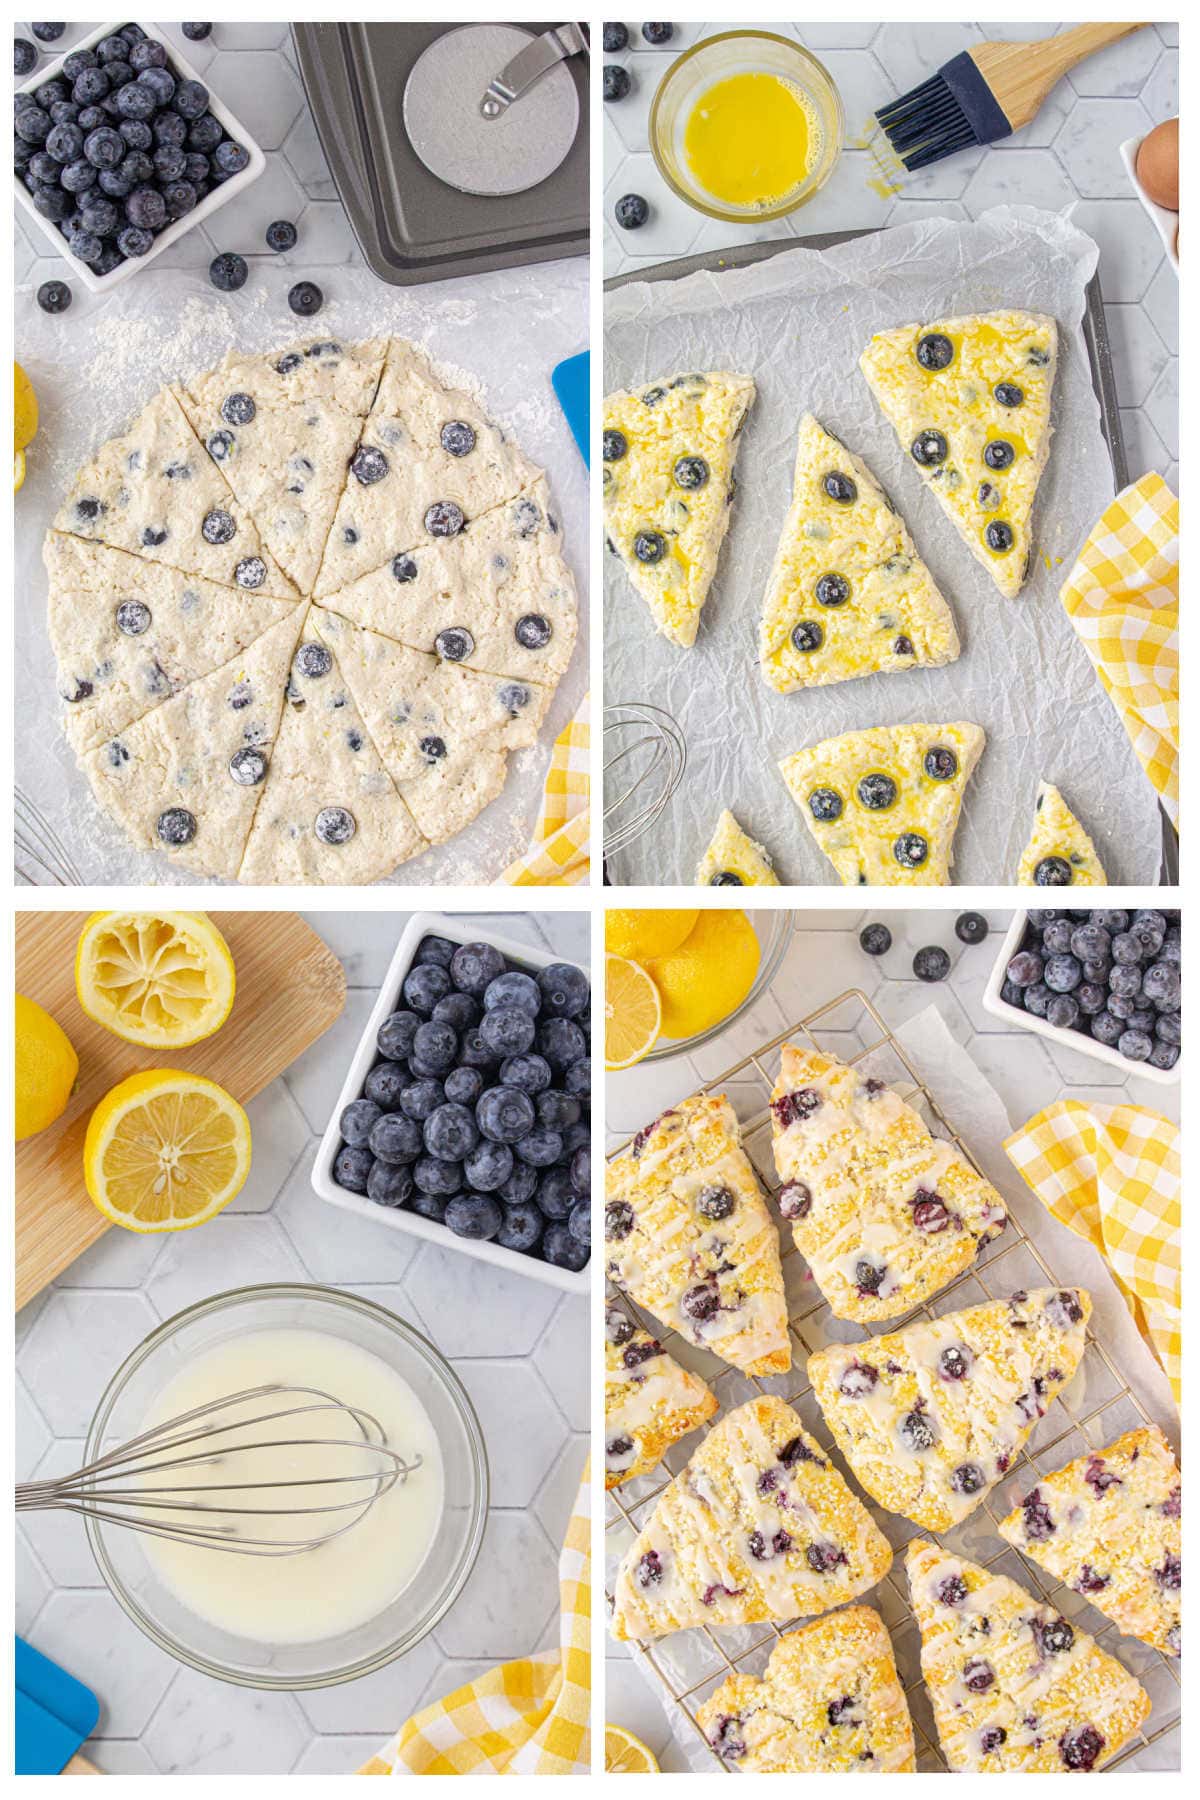 Step by step images showing how to cut and the scones and glaze them after they are baked.